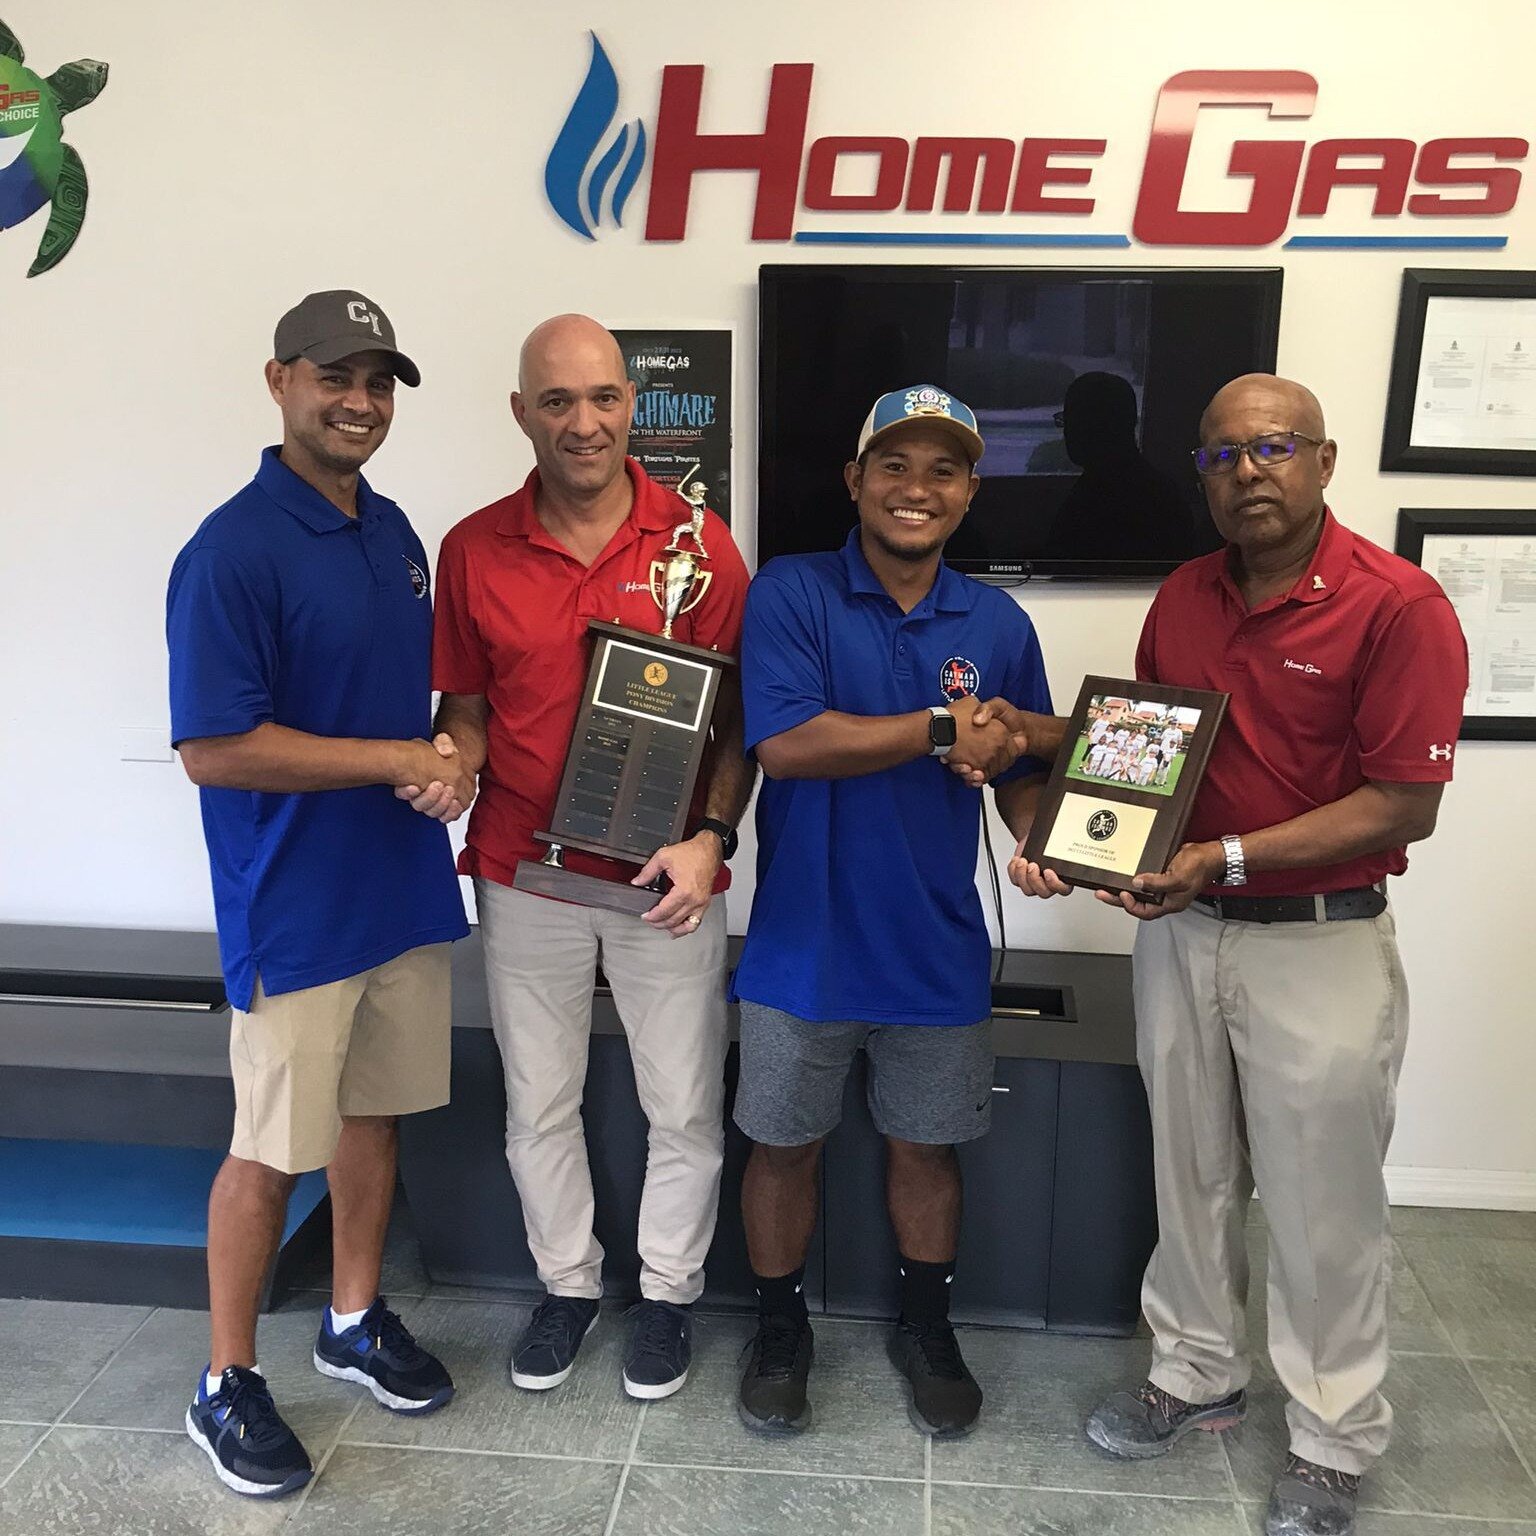 Thank you to one of long-time Little League Sponsors, Home Gas for their continued support. 

Team Home Gas won the 2022 Pony Division! 

We can&rsquo;t wait for the 2023 season!

#cilittleleague
#ymcacayman
#caymanislands